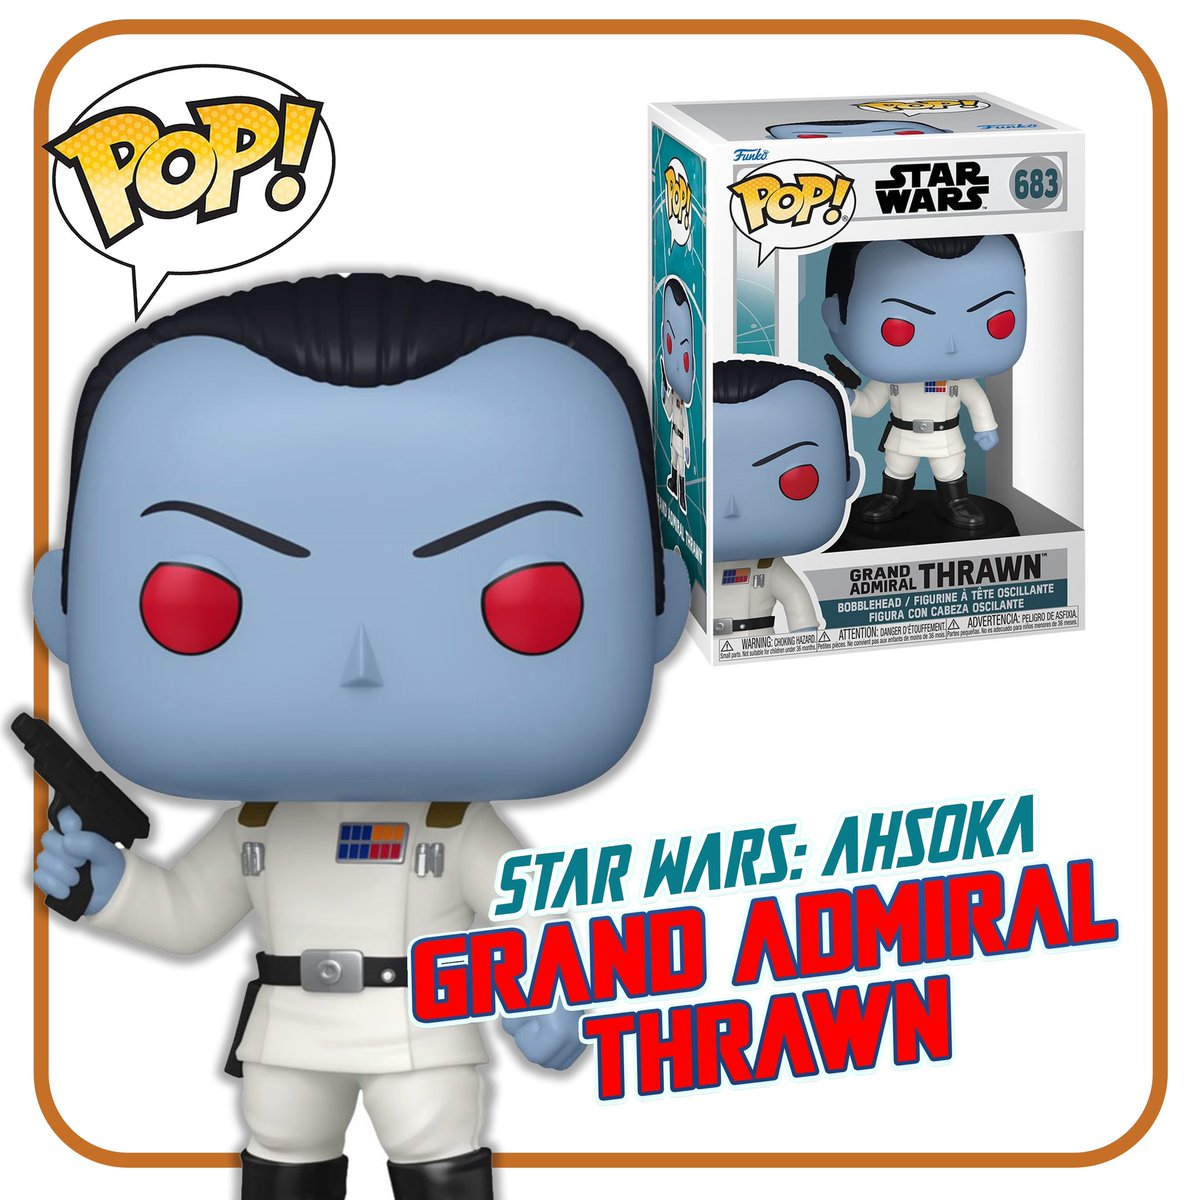 Give the gift of #Thrawn this holiday season! Grab this artistic #Funko Pop! figure from @EntEarth now!

Get it here 👉 ee.toys/XV0IMI

#StarWars #Ahsoka #FunkoPop #StarWarsCollecting #FreeProduct #iCollectAtEE #EntertainmentEarth #Affiliate #Ad